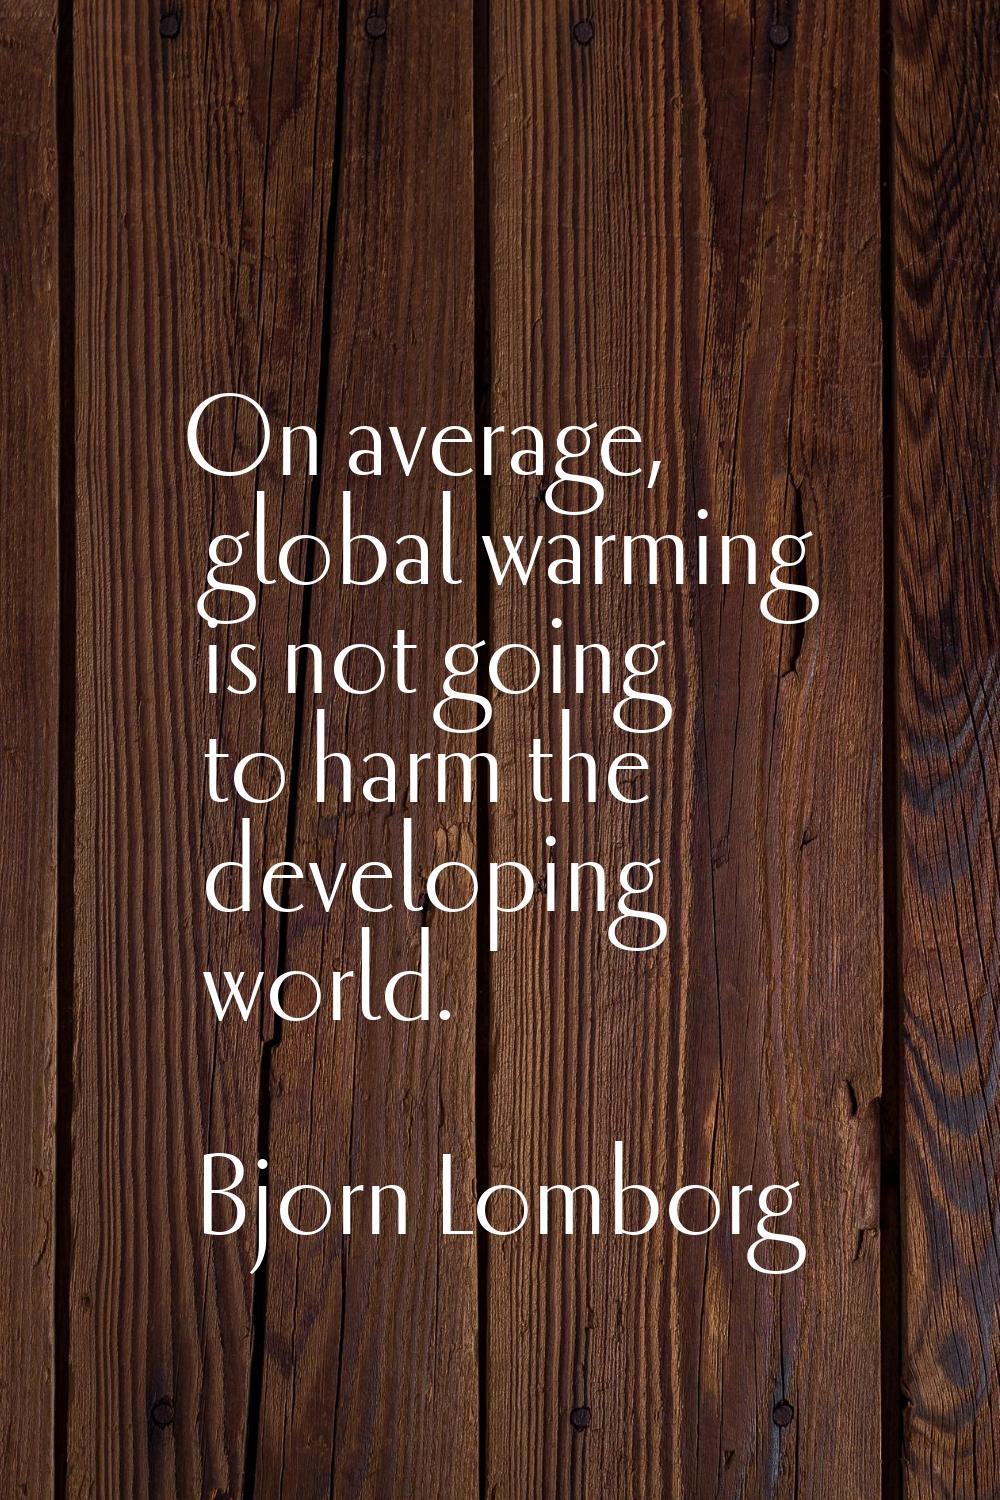 On average, global warming is not going to harm the developing world.